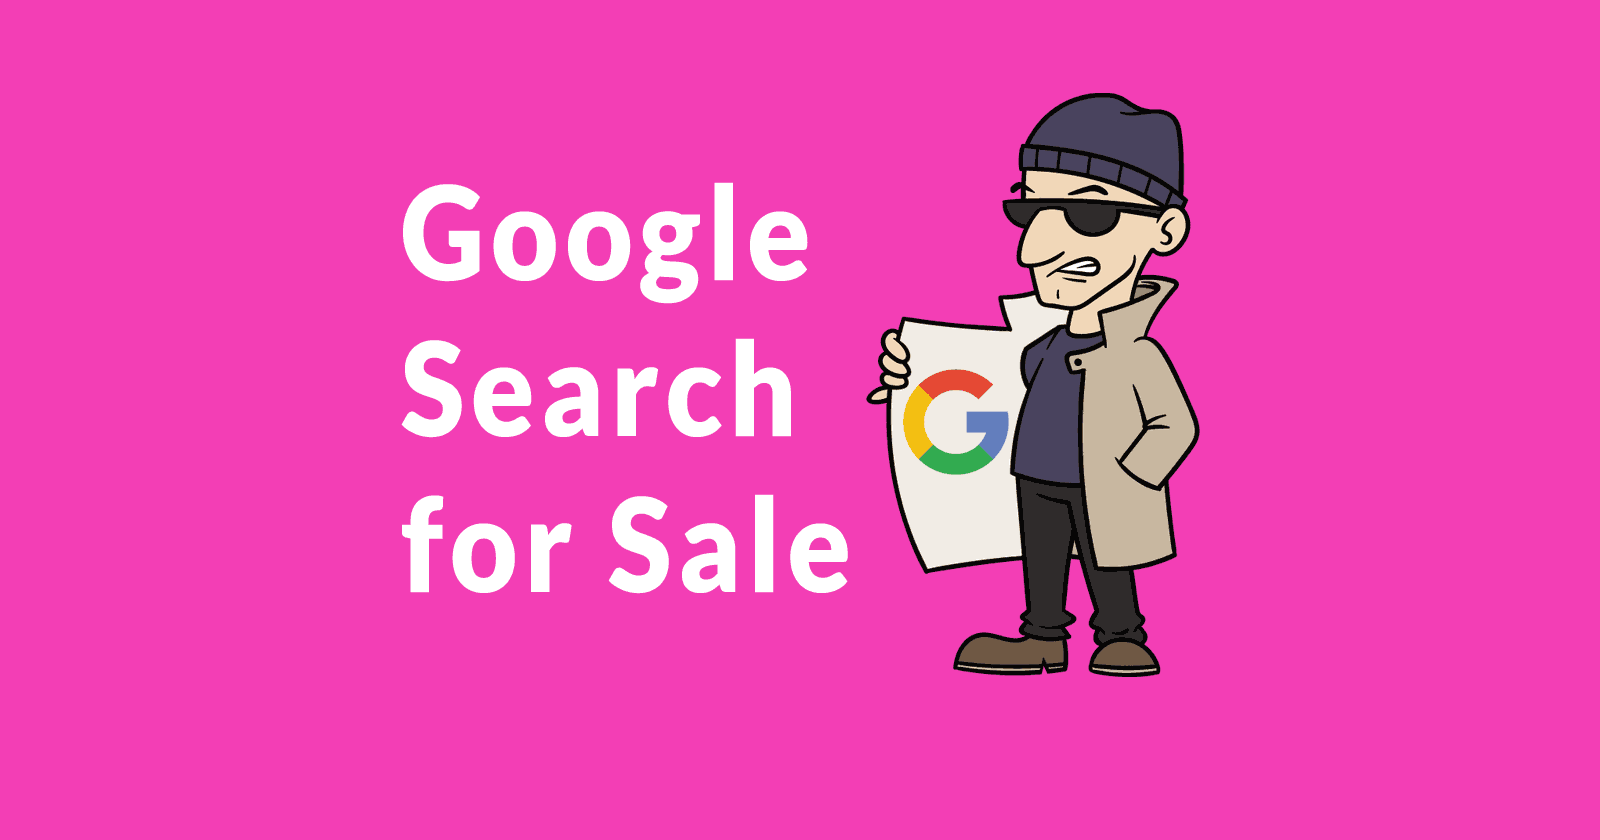 Image of a man selling illicit goods, with the words Google search for sale